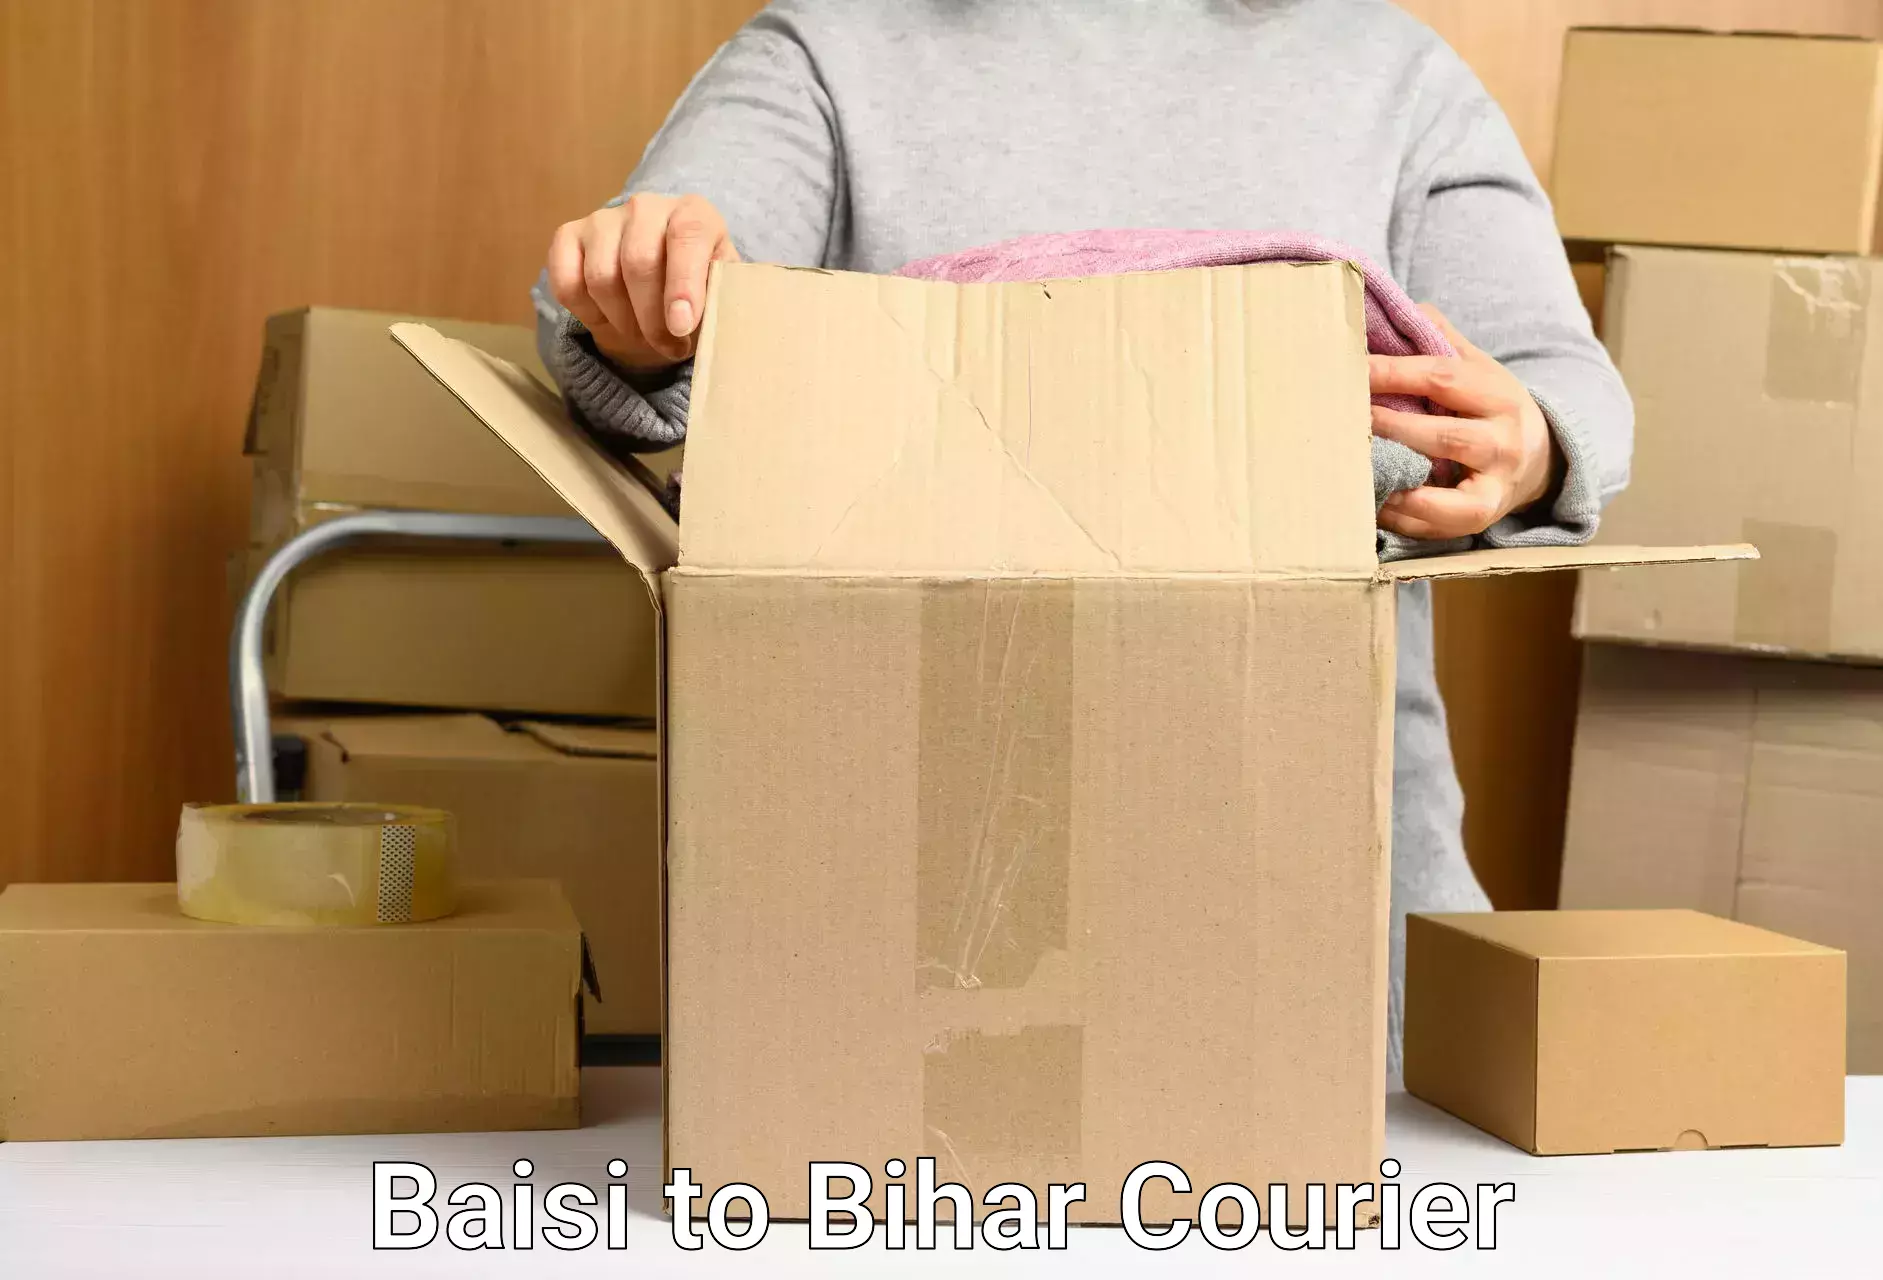 Courier services in Baisi to Rusera